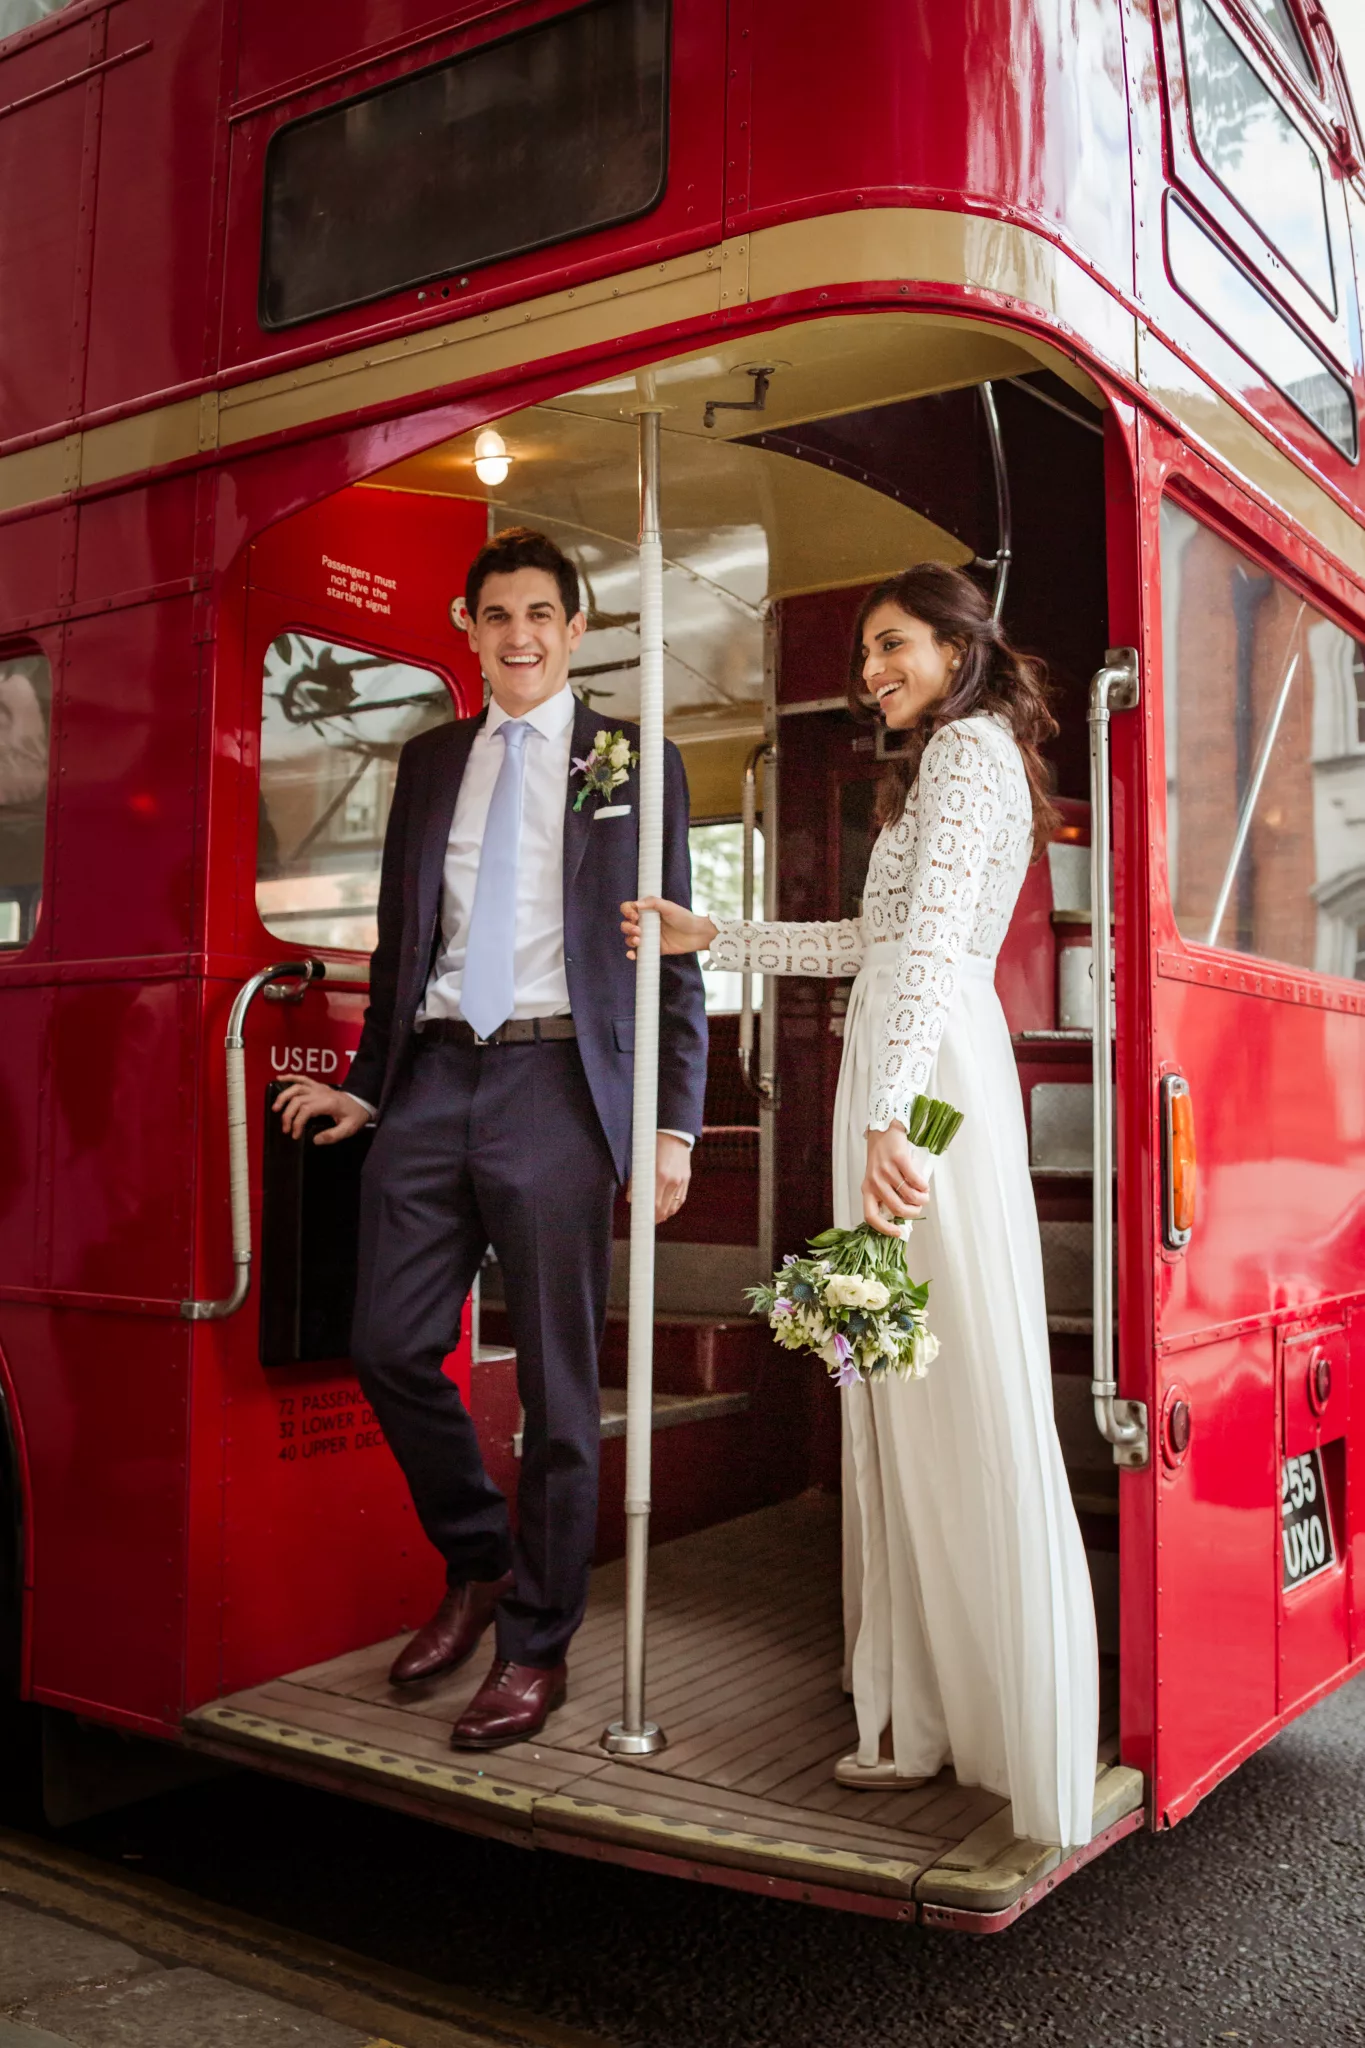 Wedding at Chelsea Old Town Hall London, red double decker bus Routemaster to reception at Winemakers Club Holborn